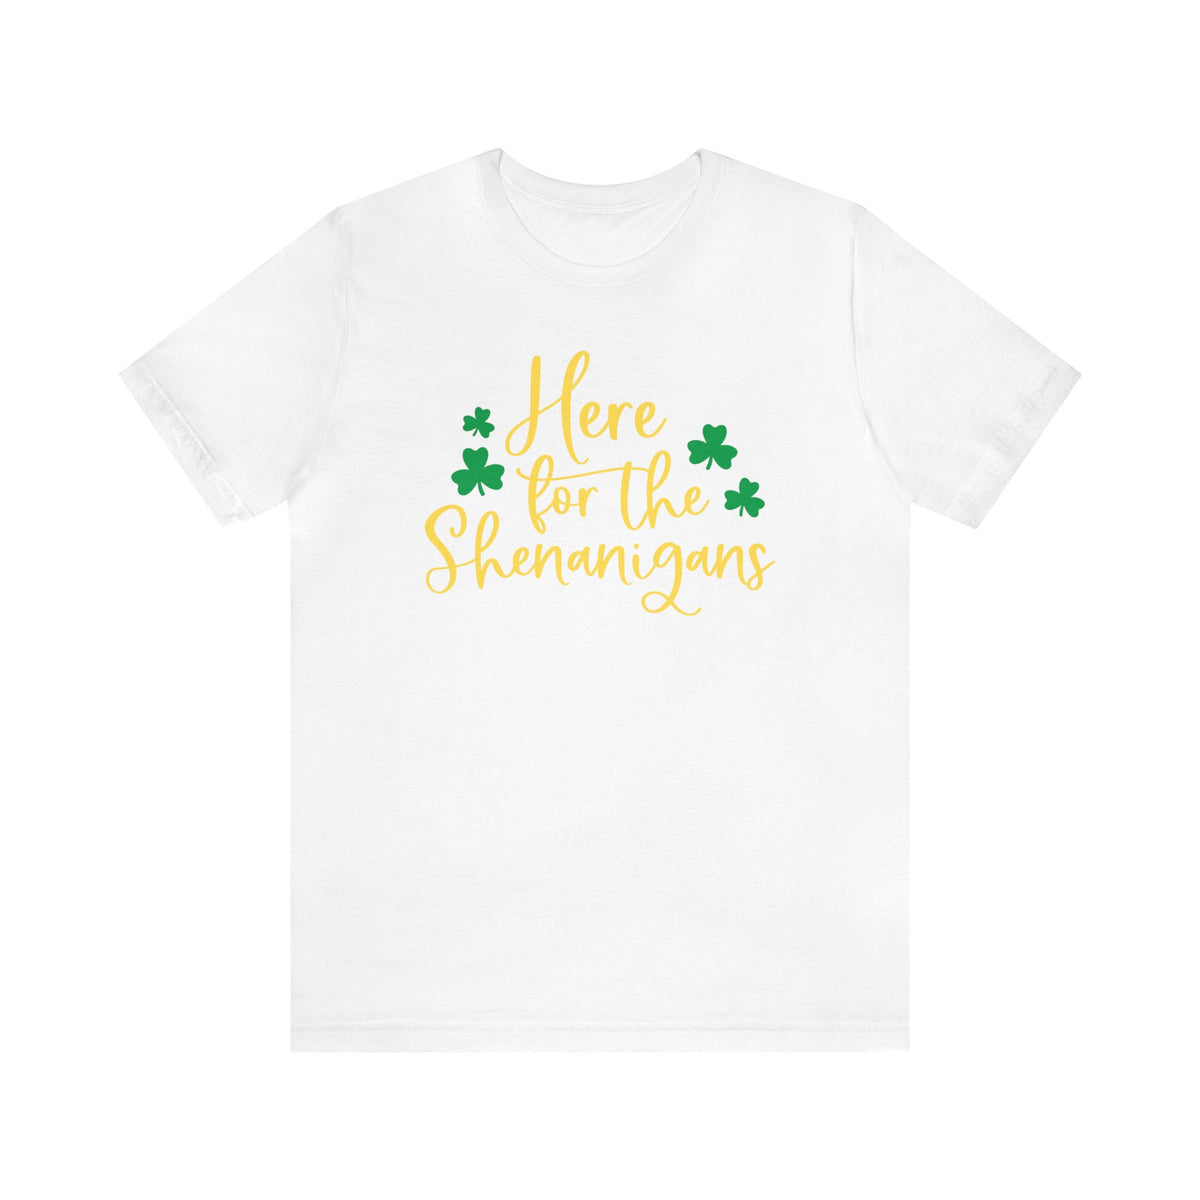 Here For The Shenanigans | St Patricks Day Tee | Funny Drinking T-shirt